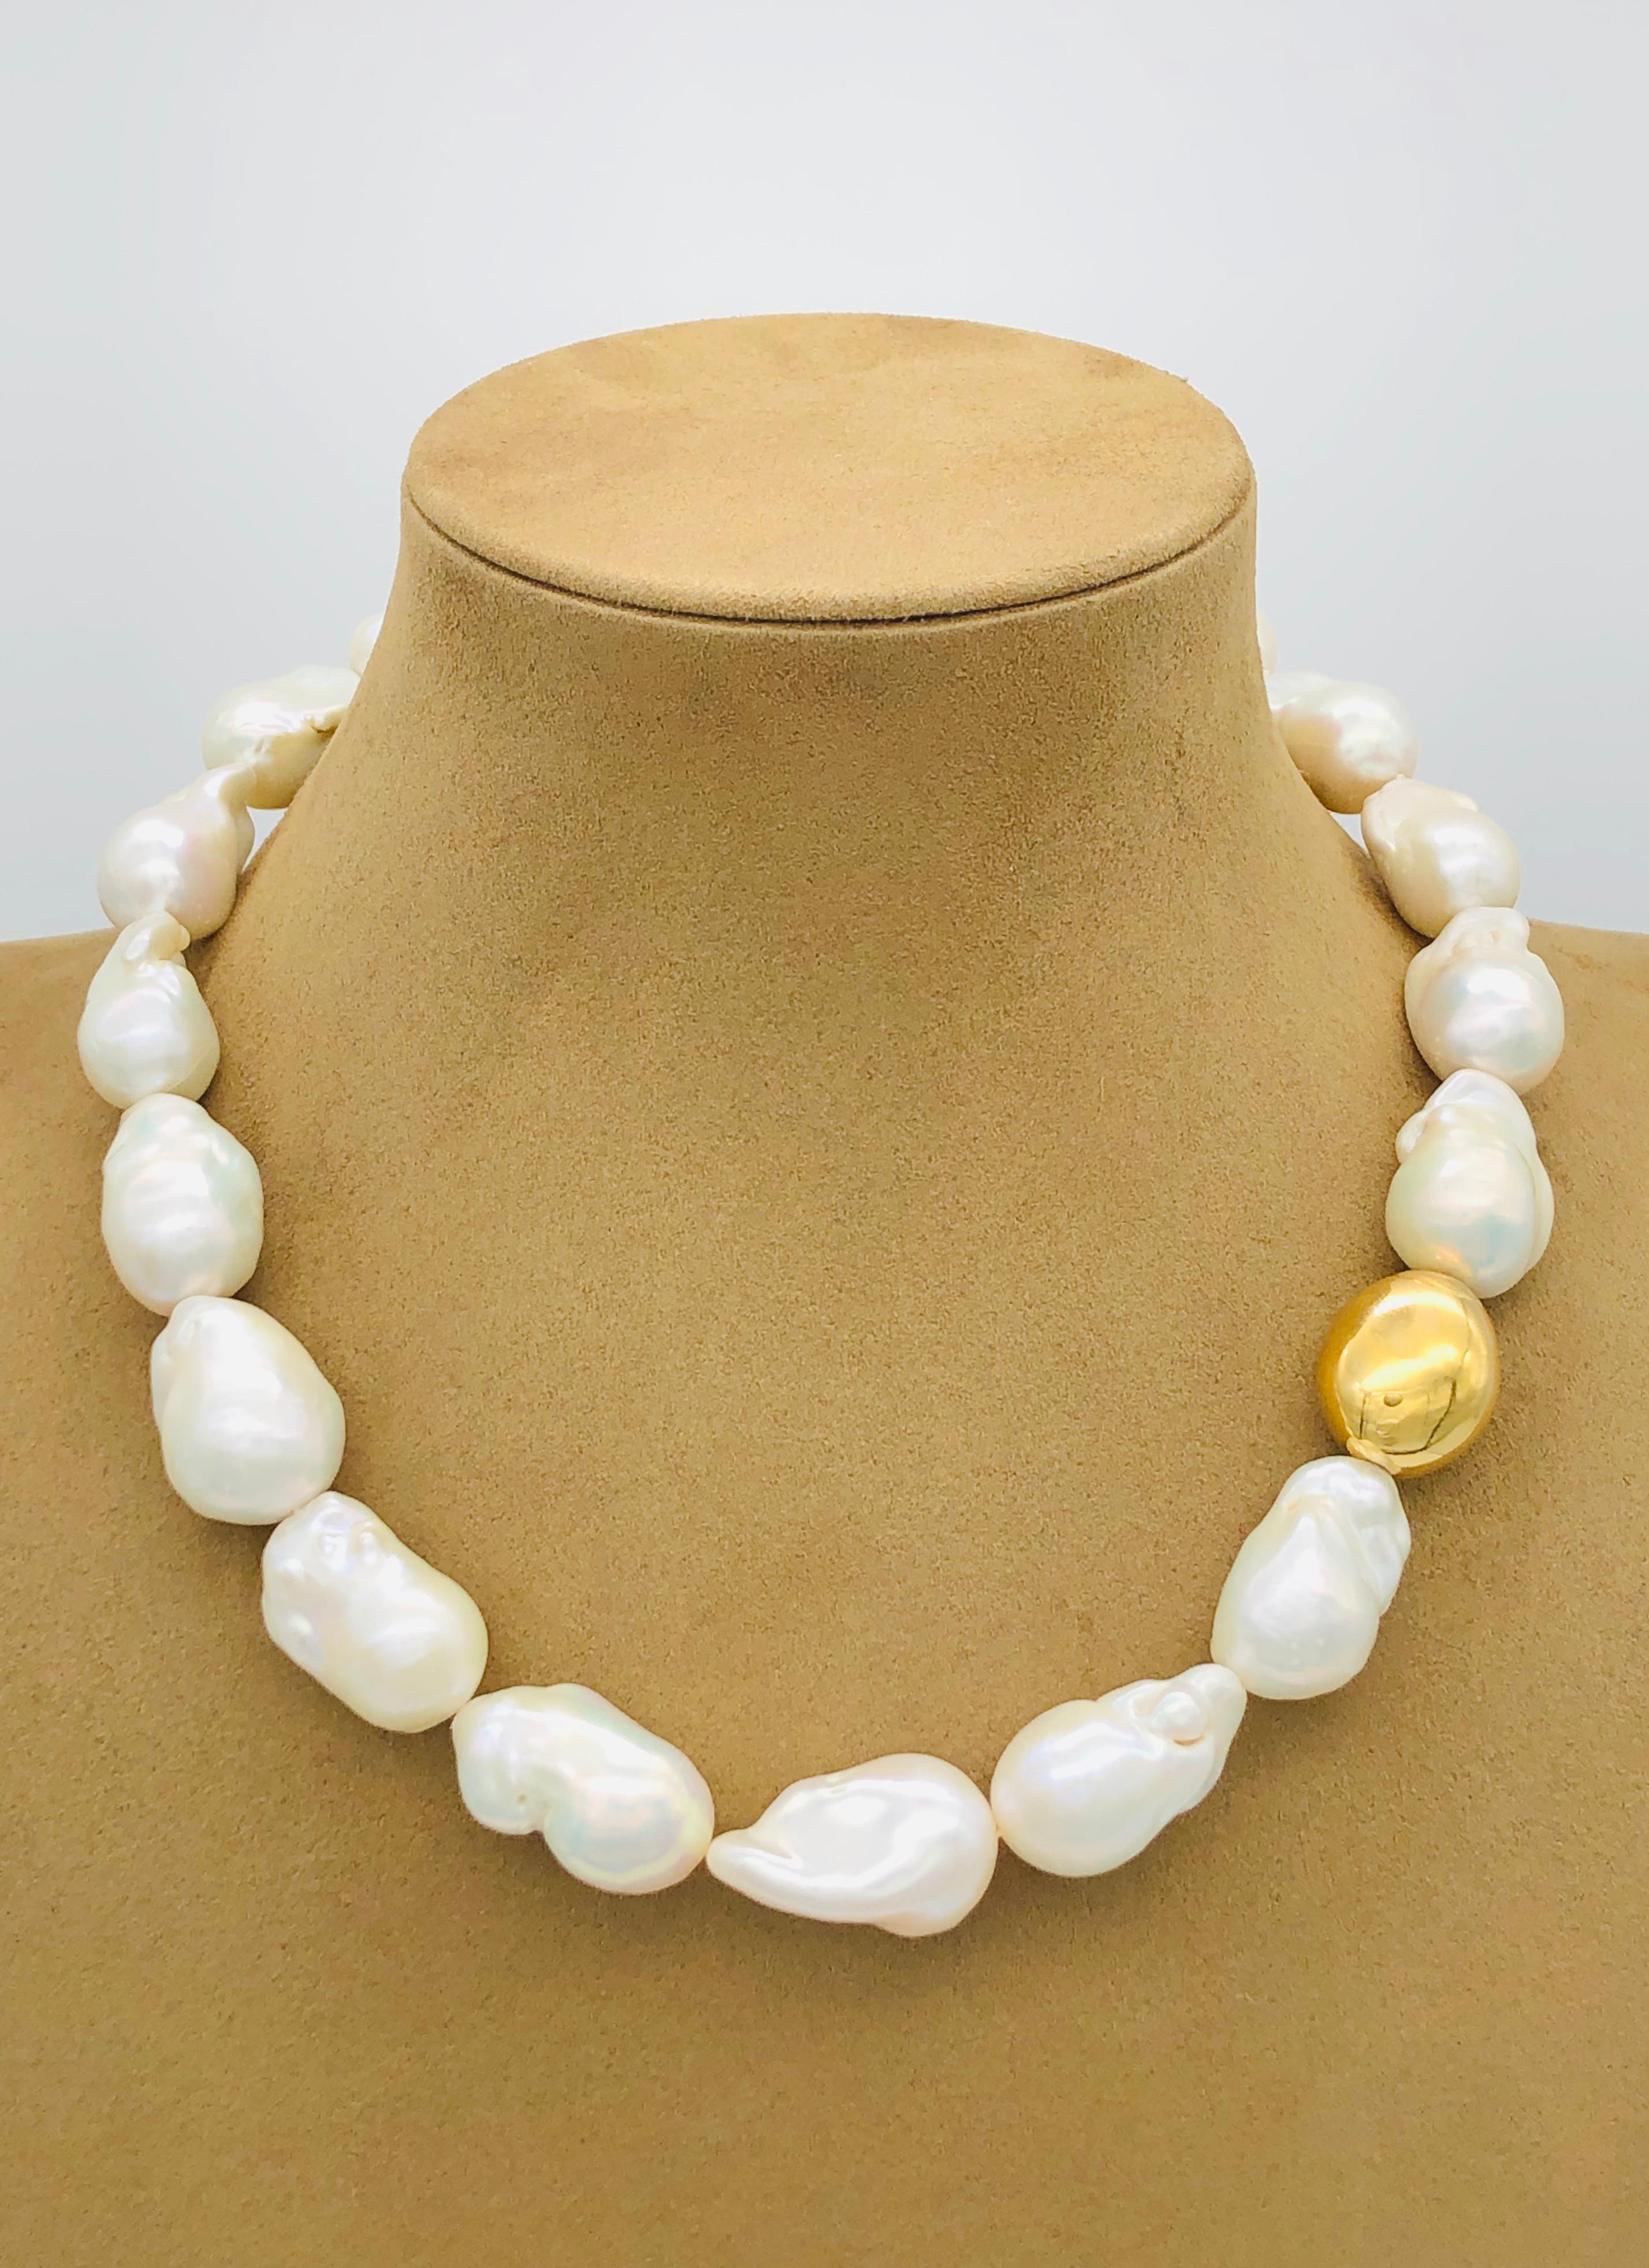 South Sea Baroque Pearls Necklaces with Yellow Gold with Bakelite Clasp
French Collection by Mesure et Art du Temps.

These baroque pearls give a more modern look to this necklace. The iridescent color reflects the spectrum of the rainbow. This